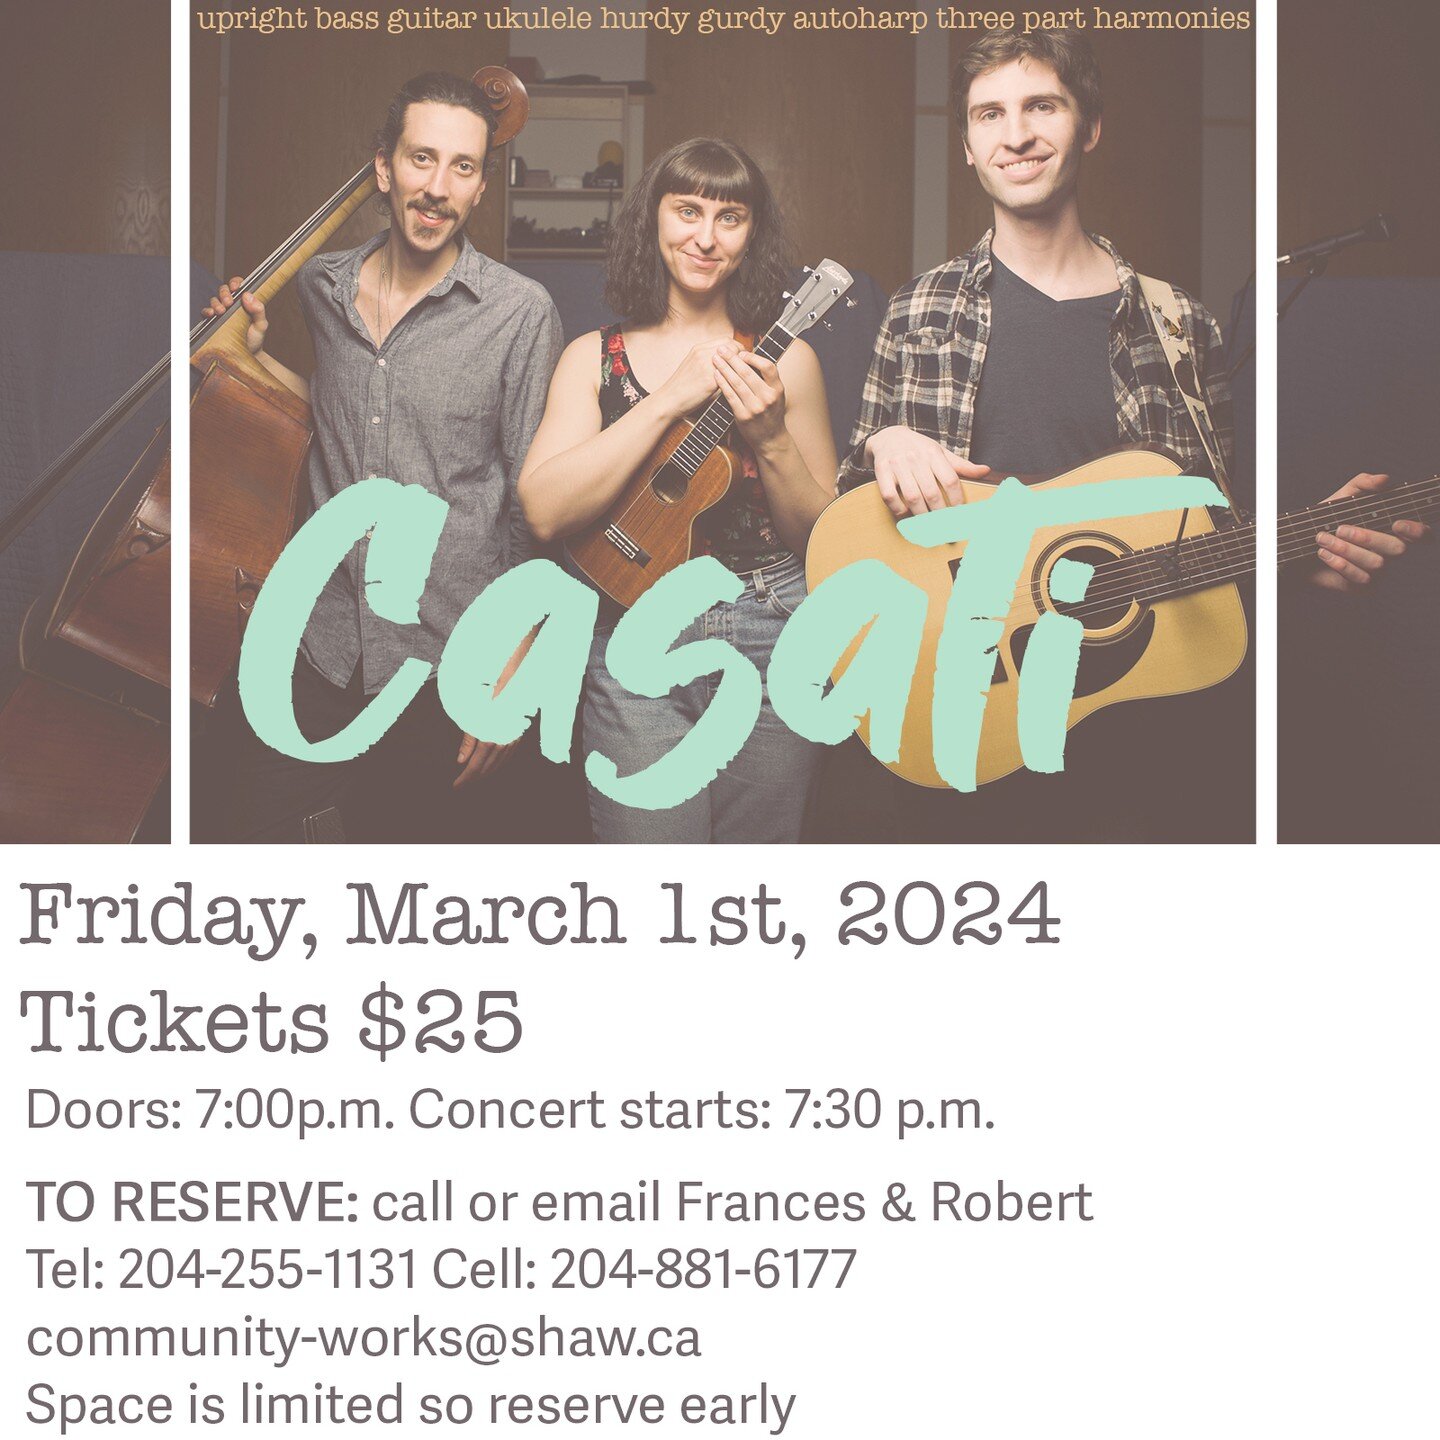 We're playing a house concert in Winnipeg this Friday! There are 4 tickets remaining, so if you're looking for a fun and cozy way to end your week, email Frances &amp; Robert at community-works@shaw.ca to purchase your tickets today!

Maybe see you t